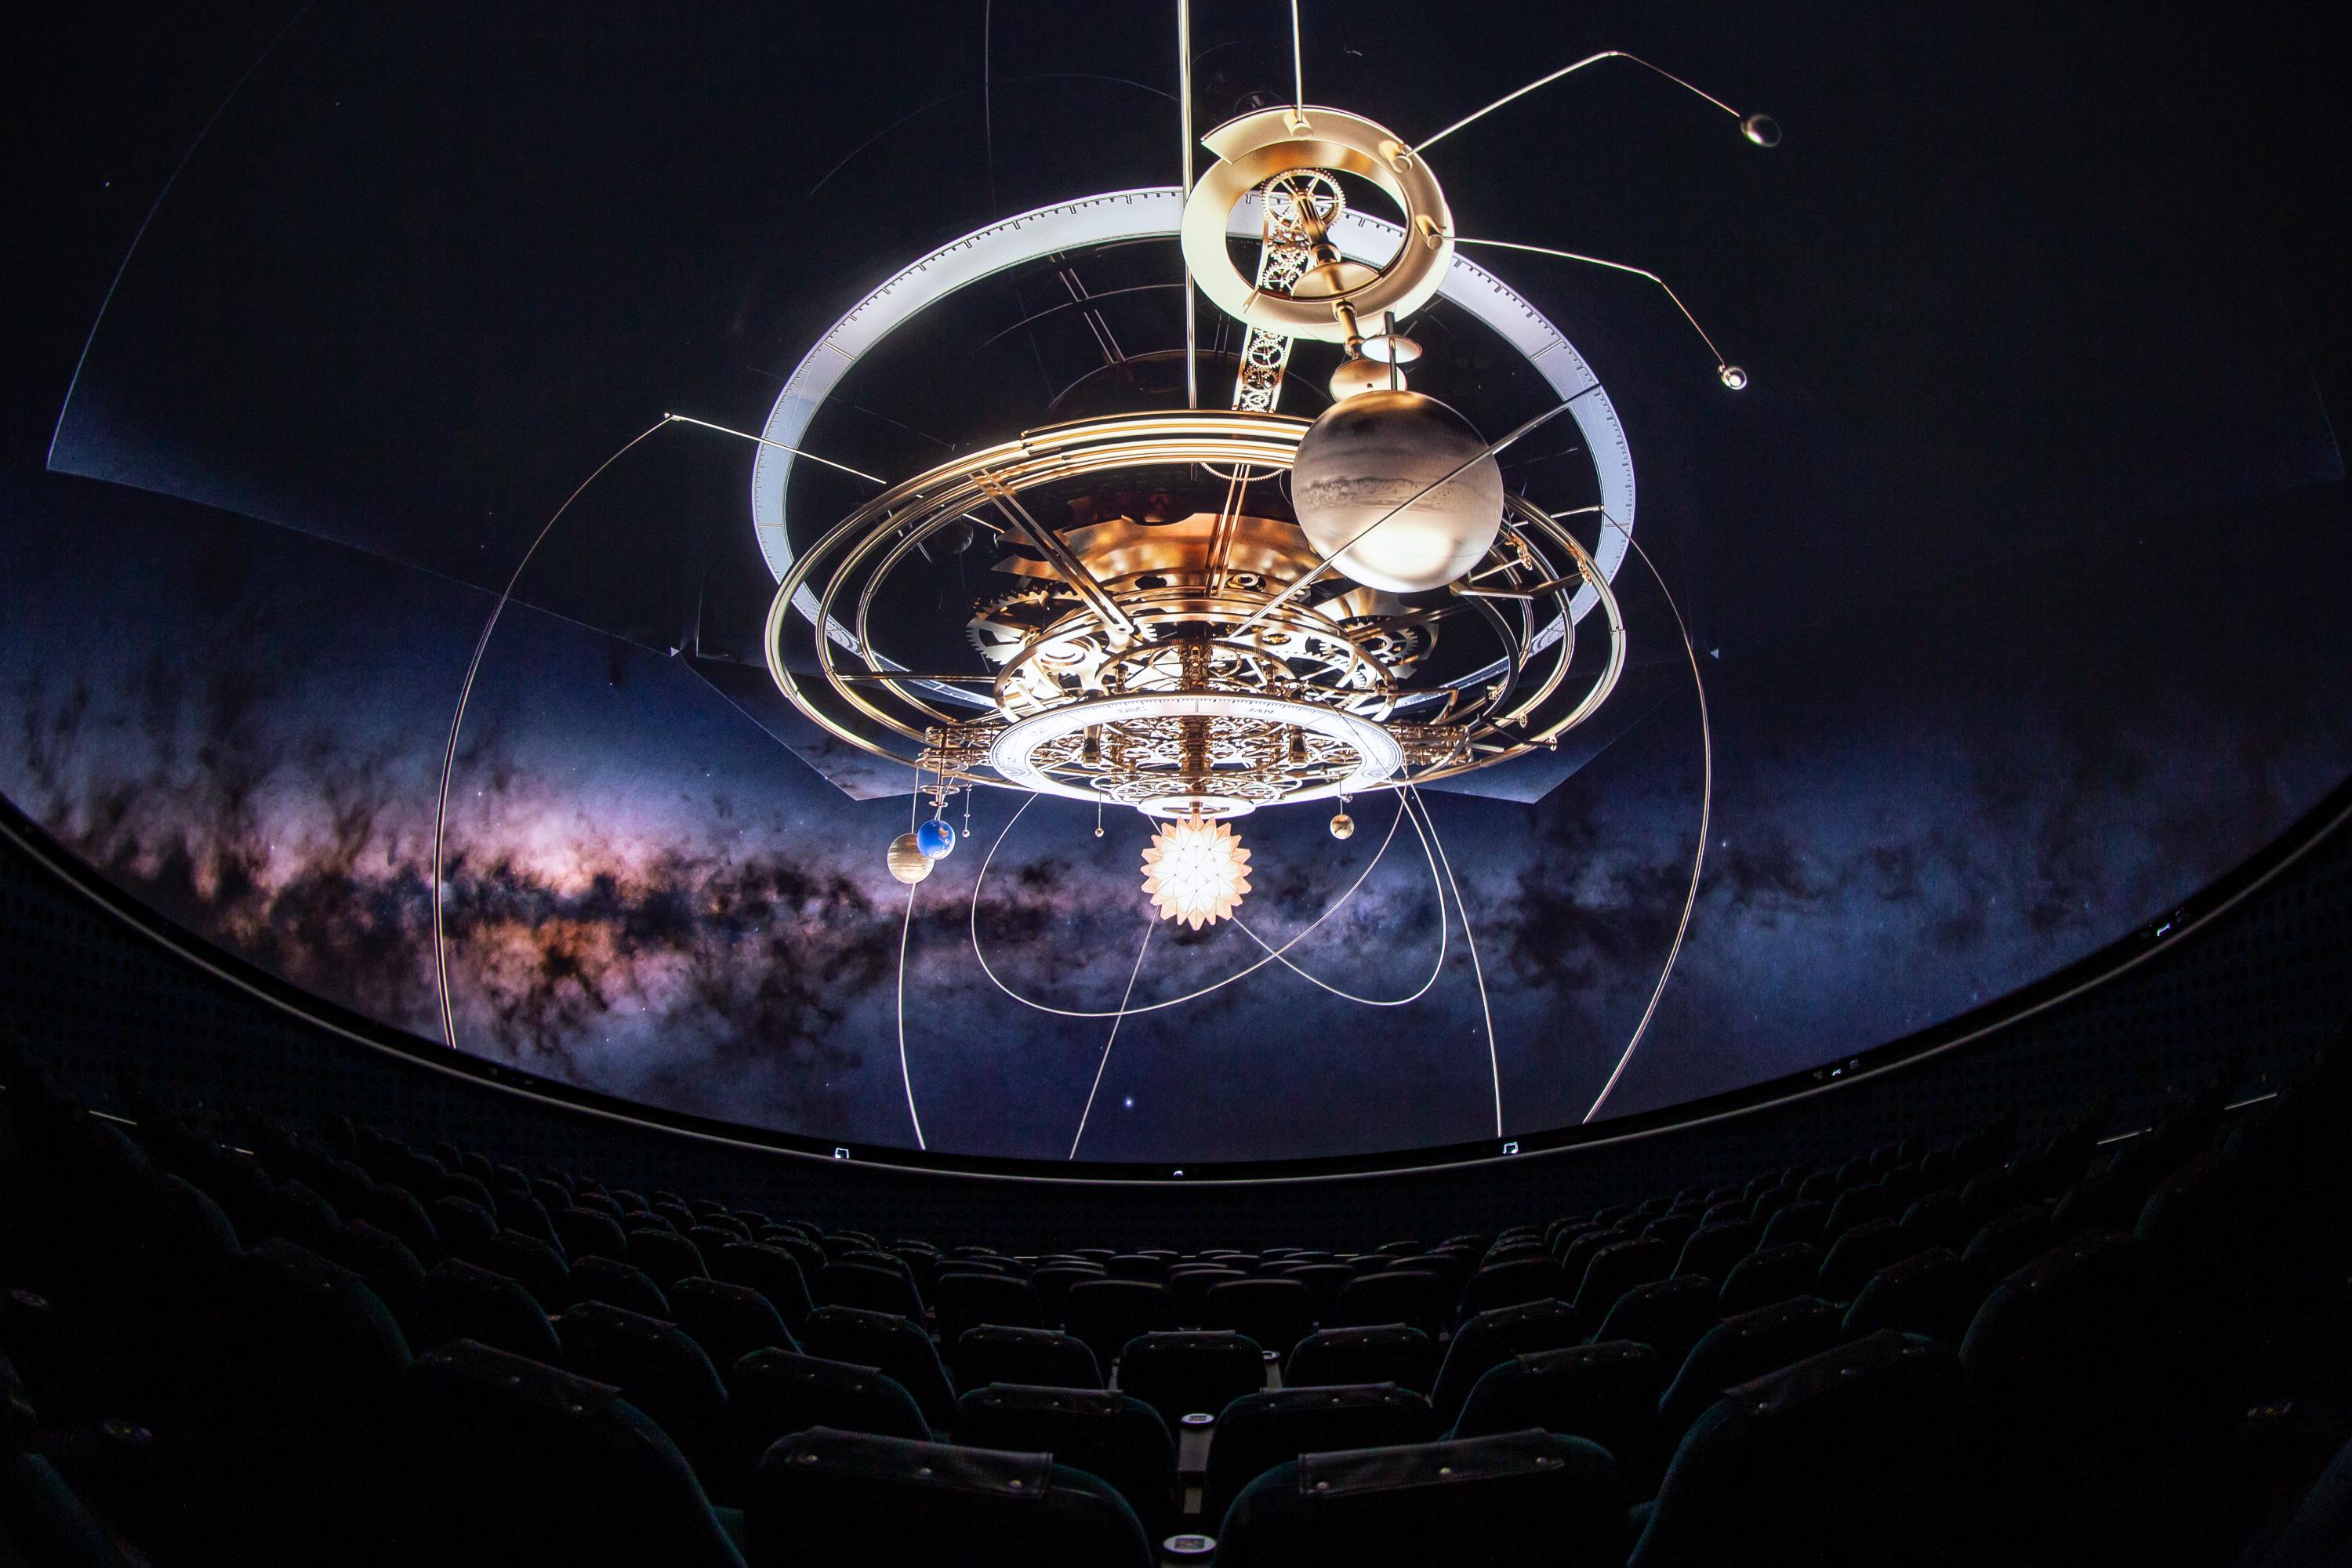 Full-dome image of the Dark Side of the Moon planetarium show, depicting an astrolabe